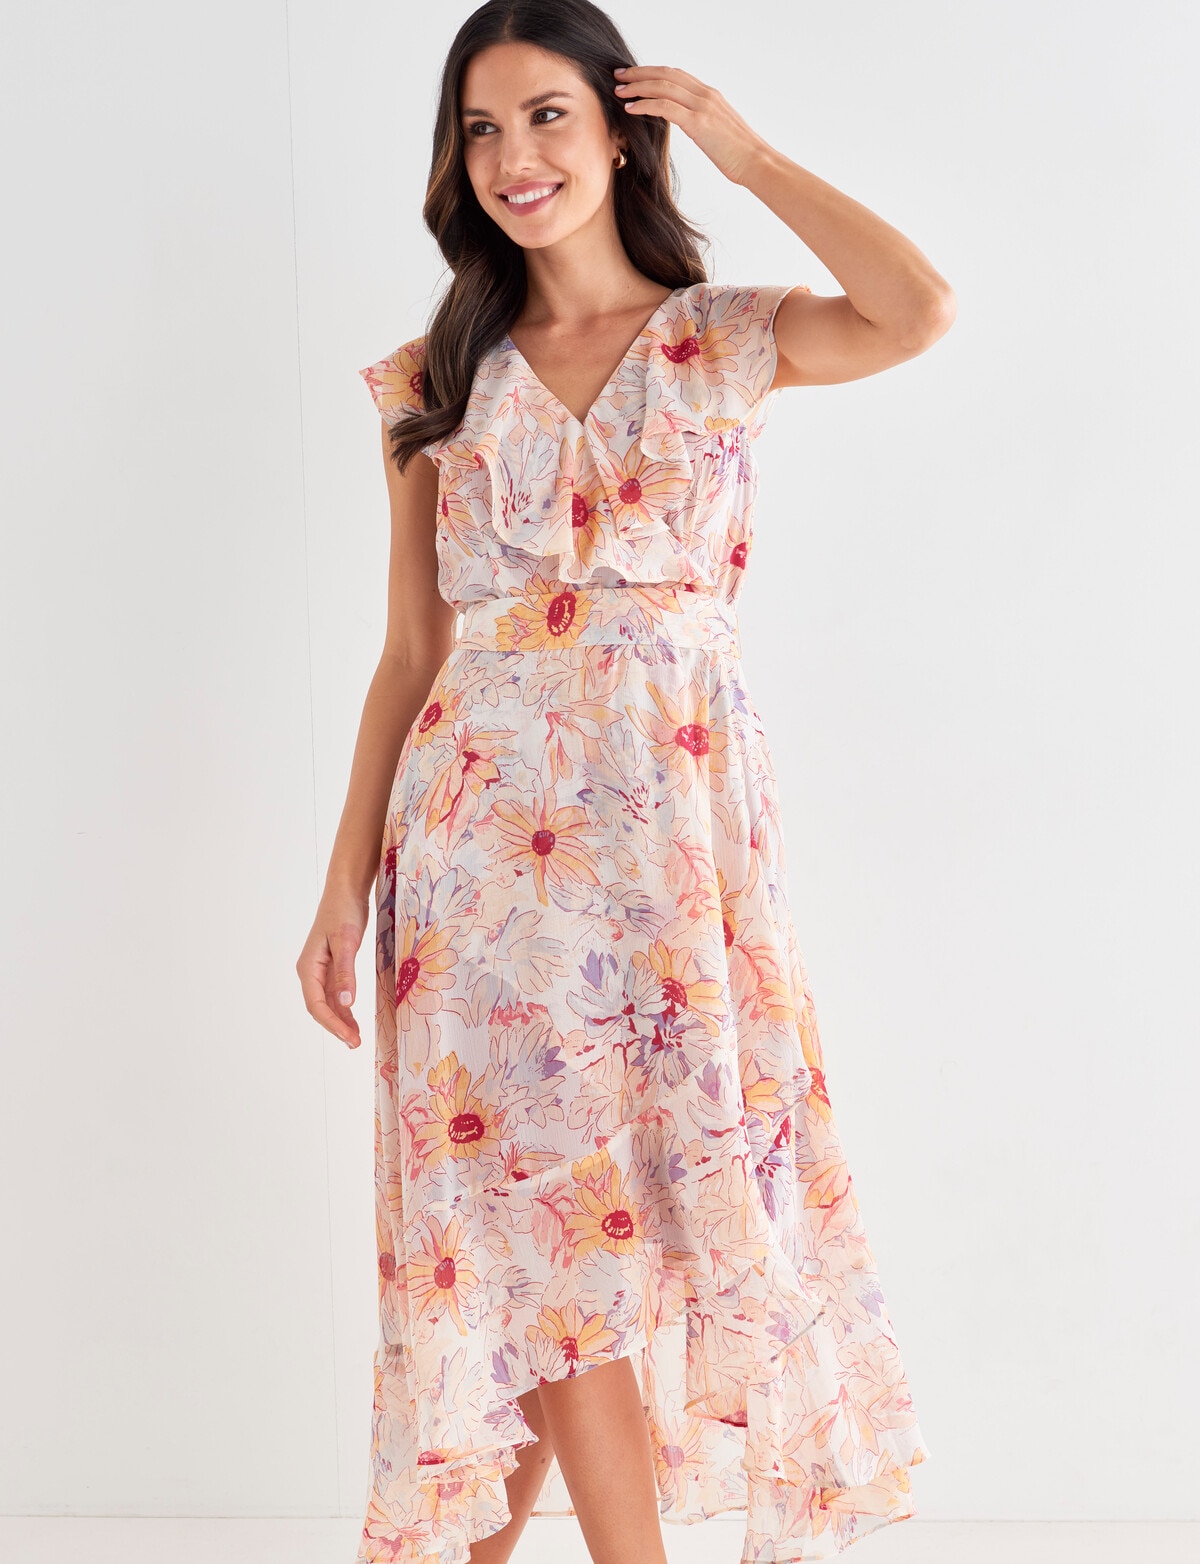 Whistle Spring Flowers Ruffle Wrap Dress, Peach - Womens Red Dot